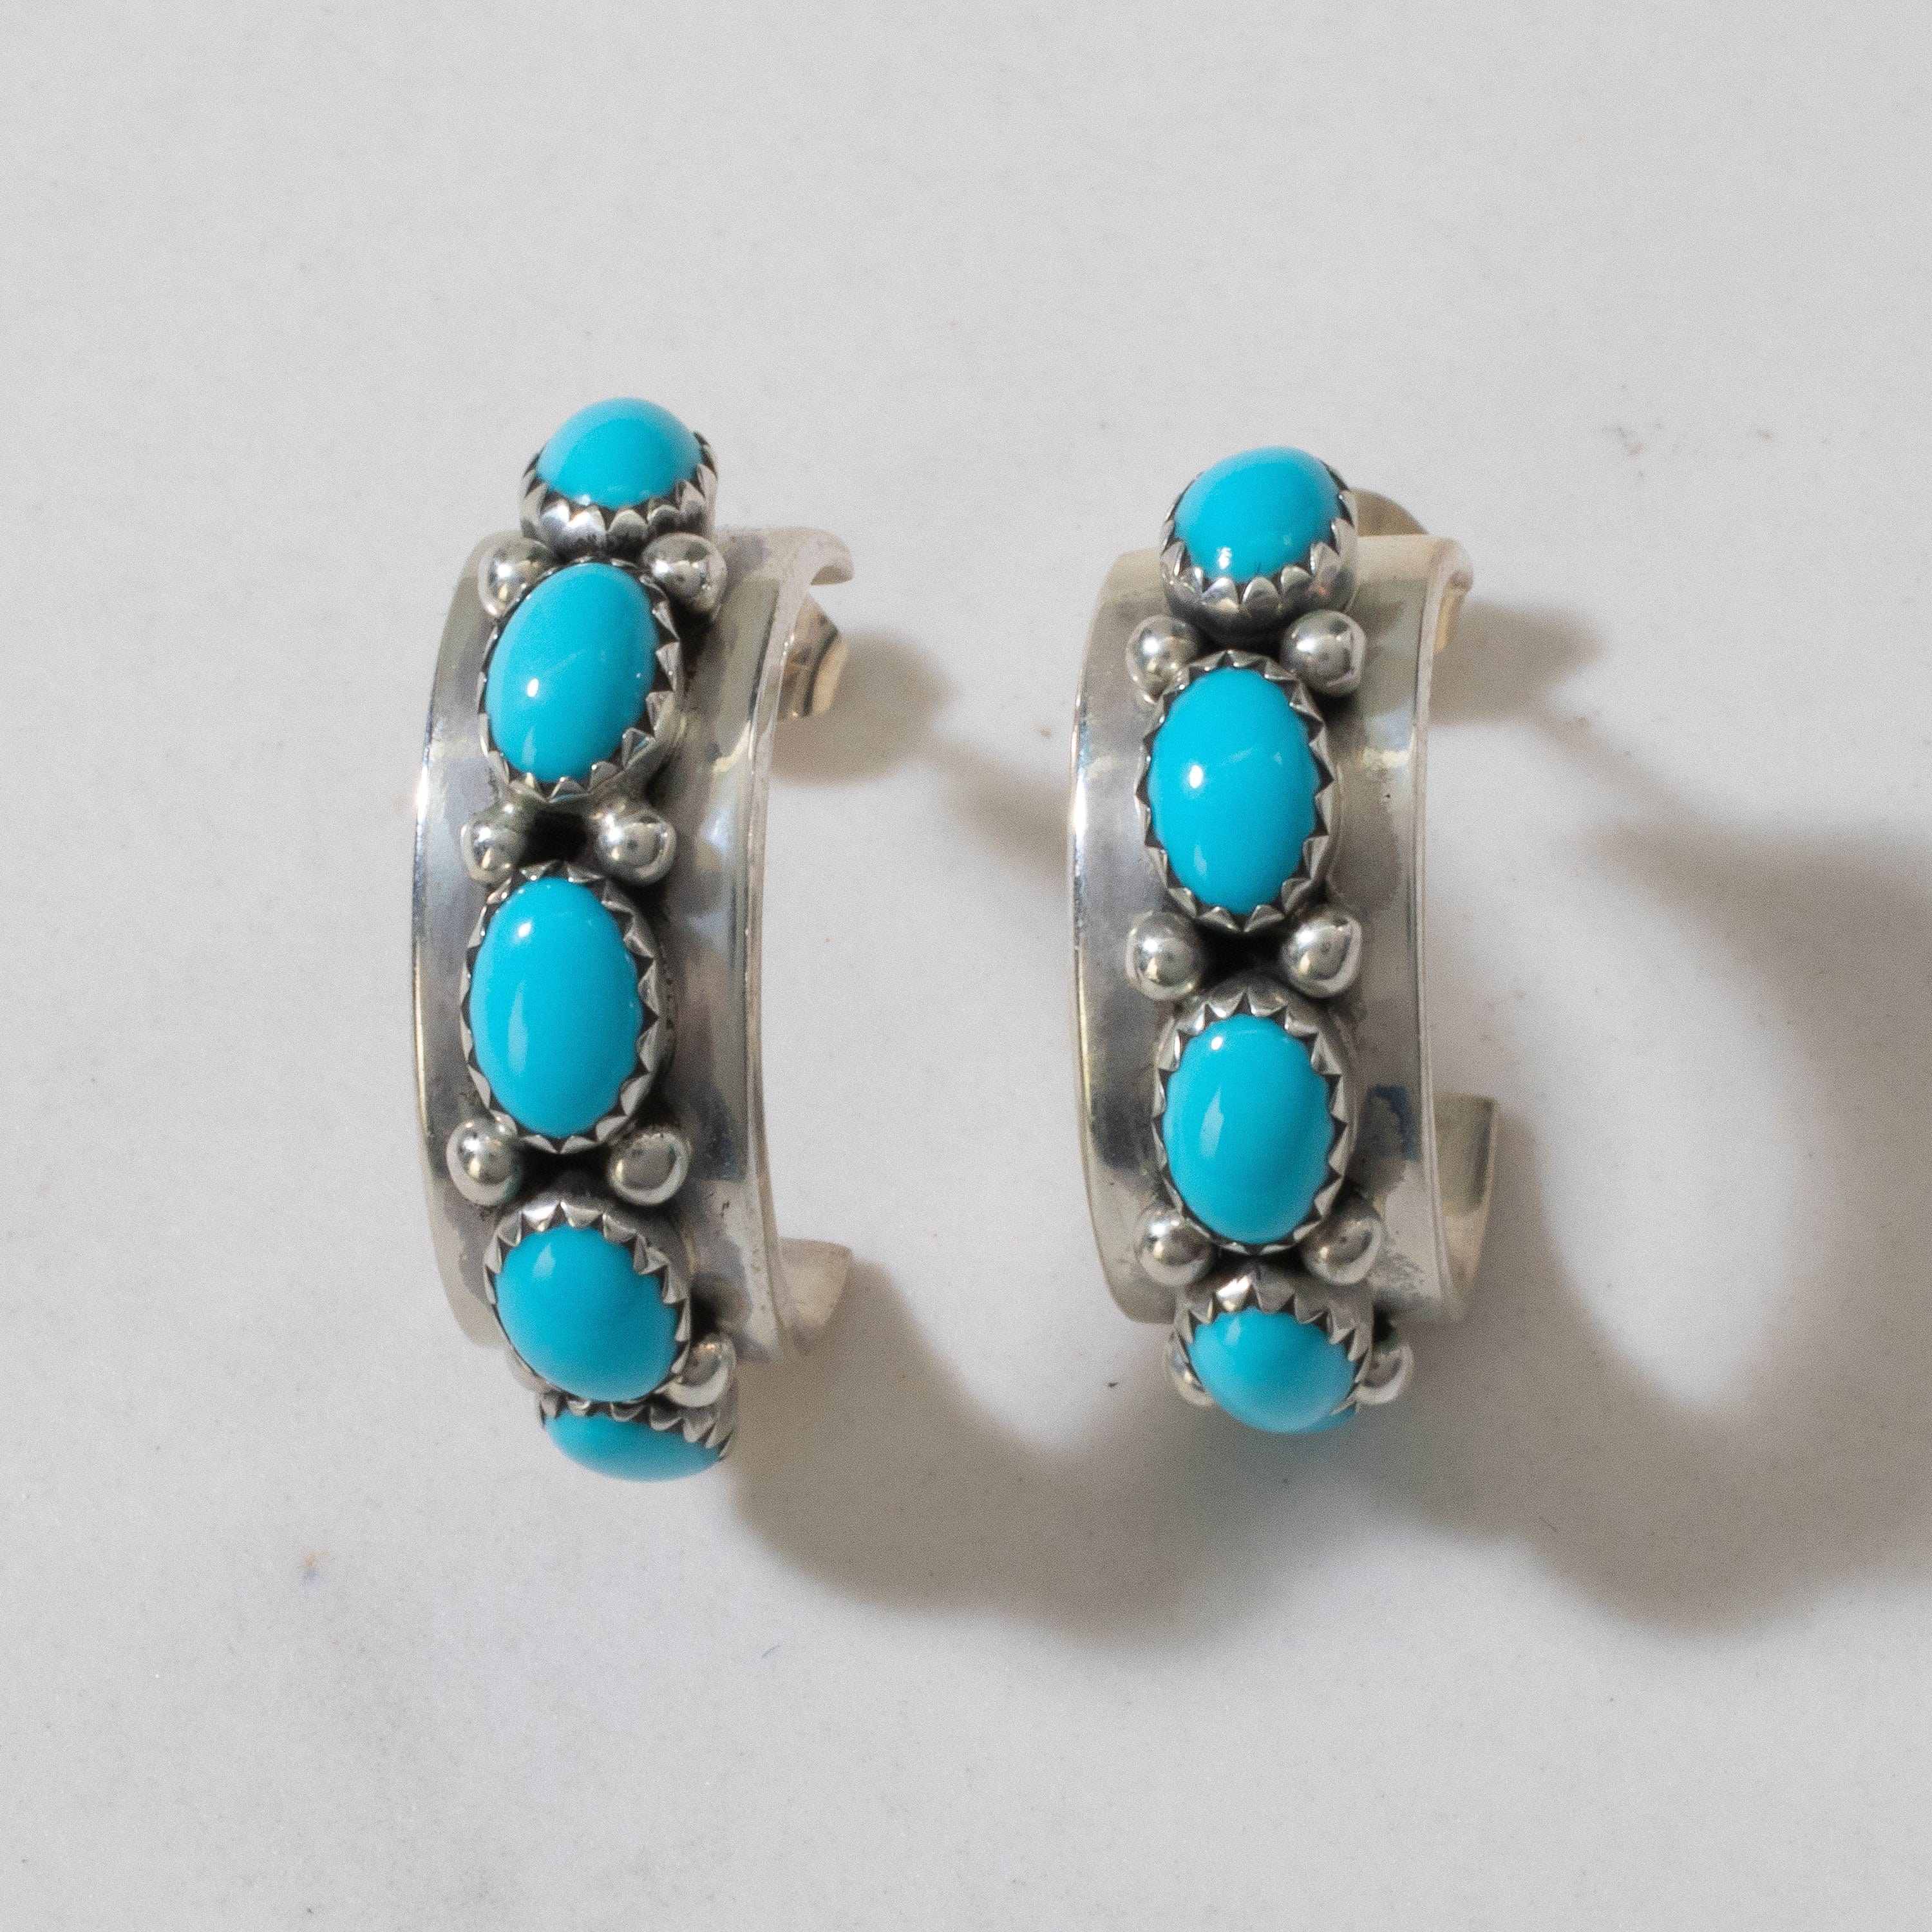 Kalifano Native American Jewelry Sleeping Beauty Turquoise Semi Hoop Navajo USA Native American Made 925 Sterling Silver Earrings with Stud Backing NAE600.020